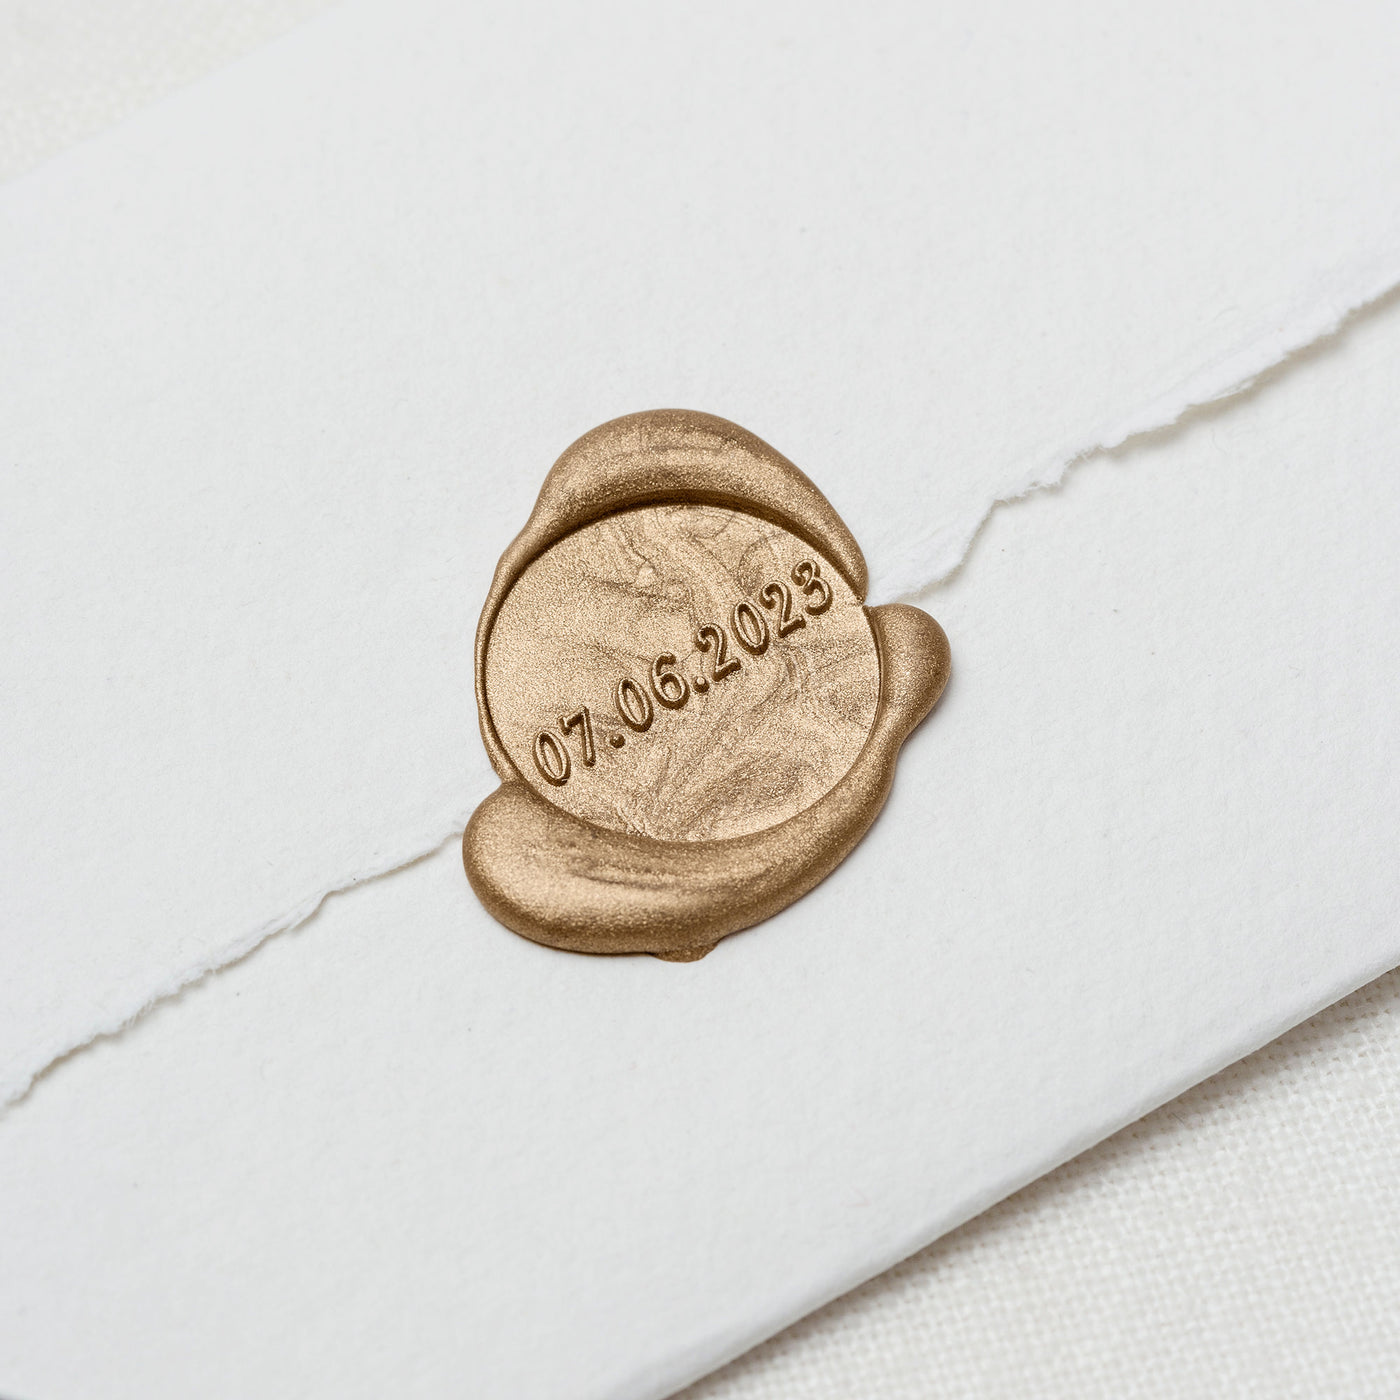 SAVE THE DATE SCRIPT WAX SEAL STAMP - WORTH THE WAIT